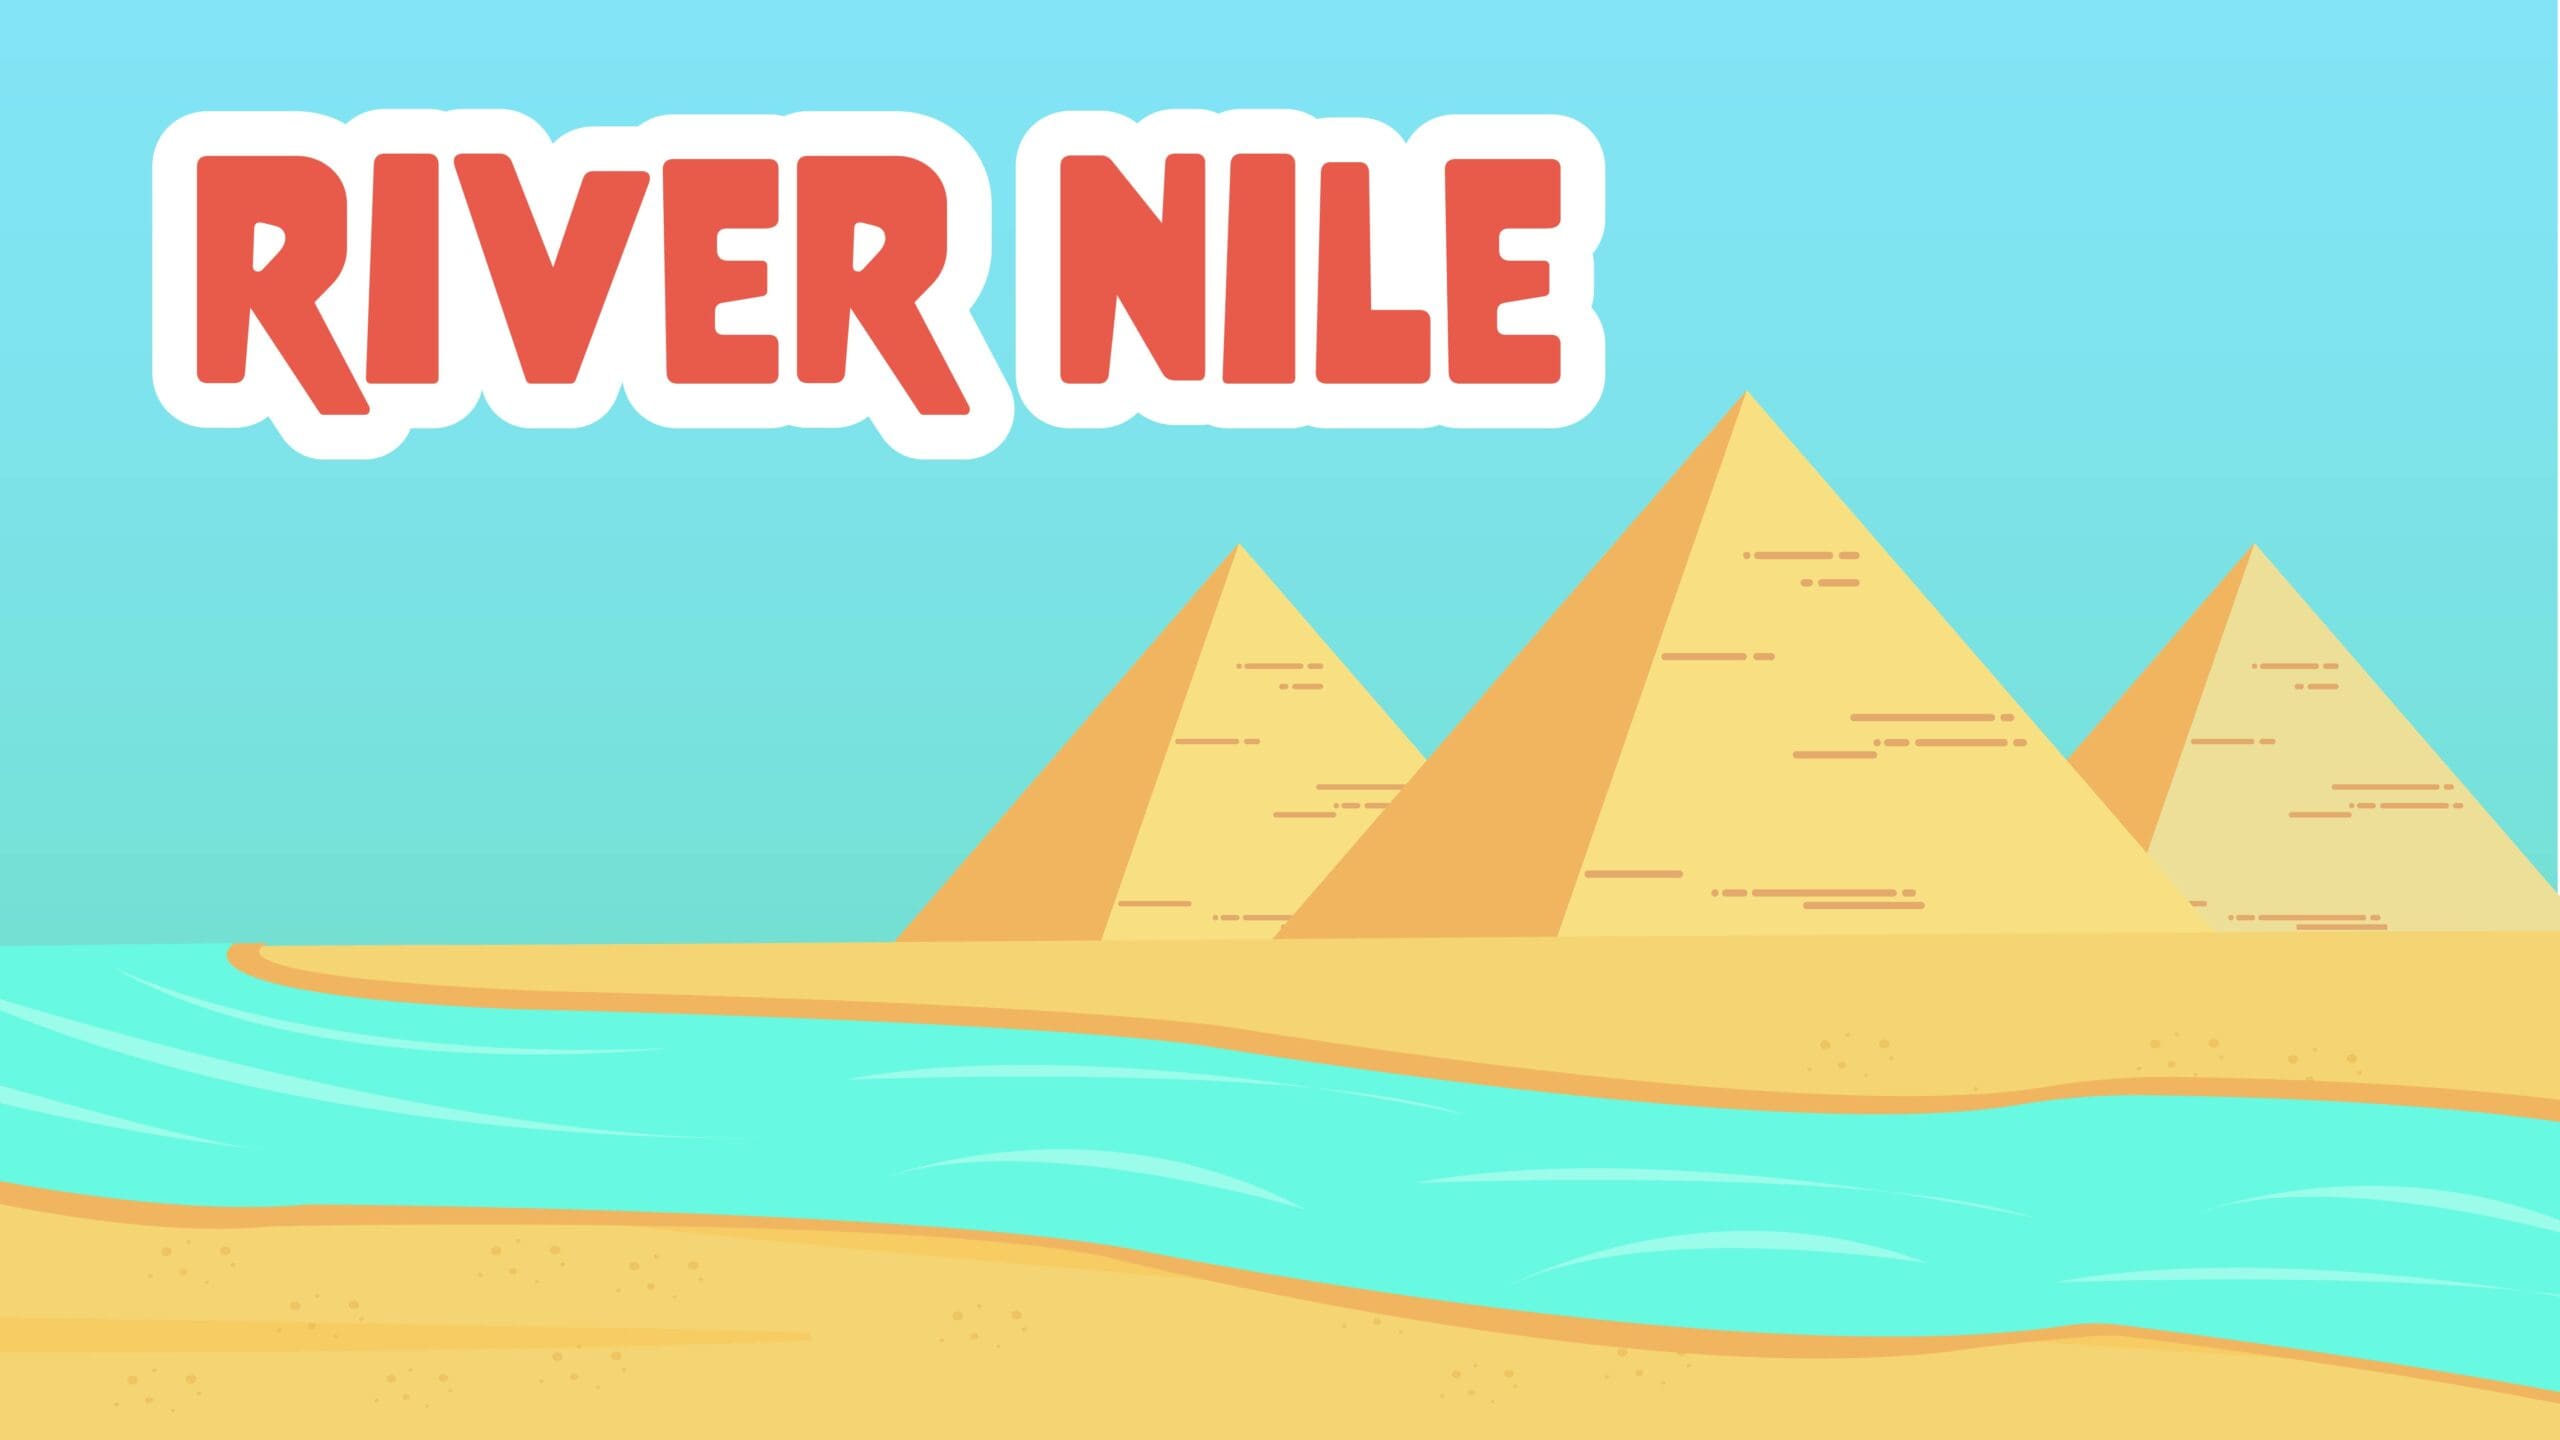 River Nile Facts for Kids – 5 Super Facts about the River Nile